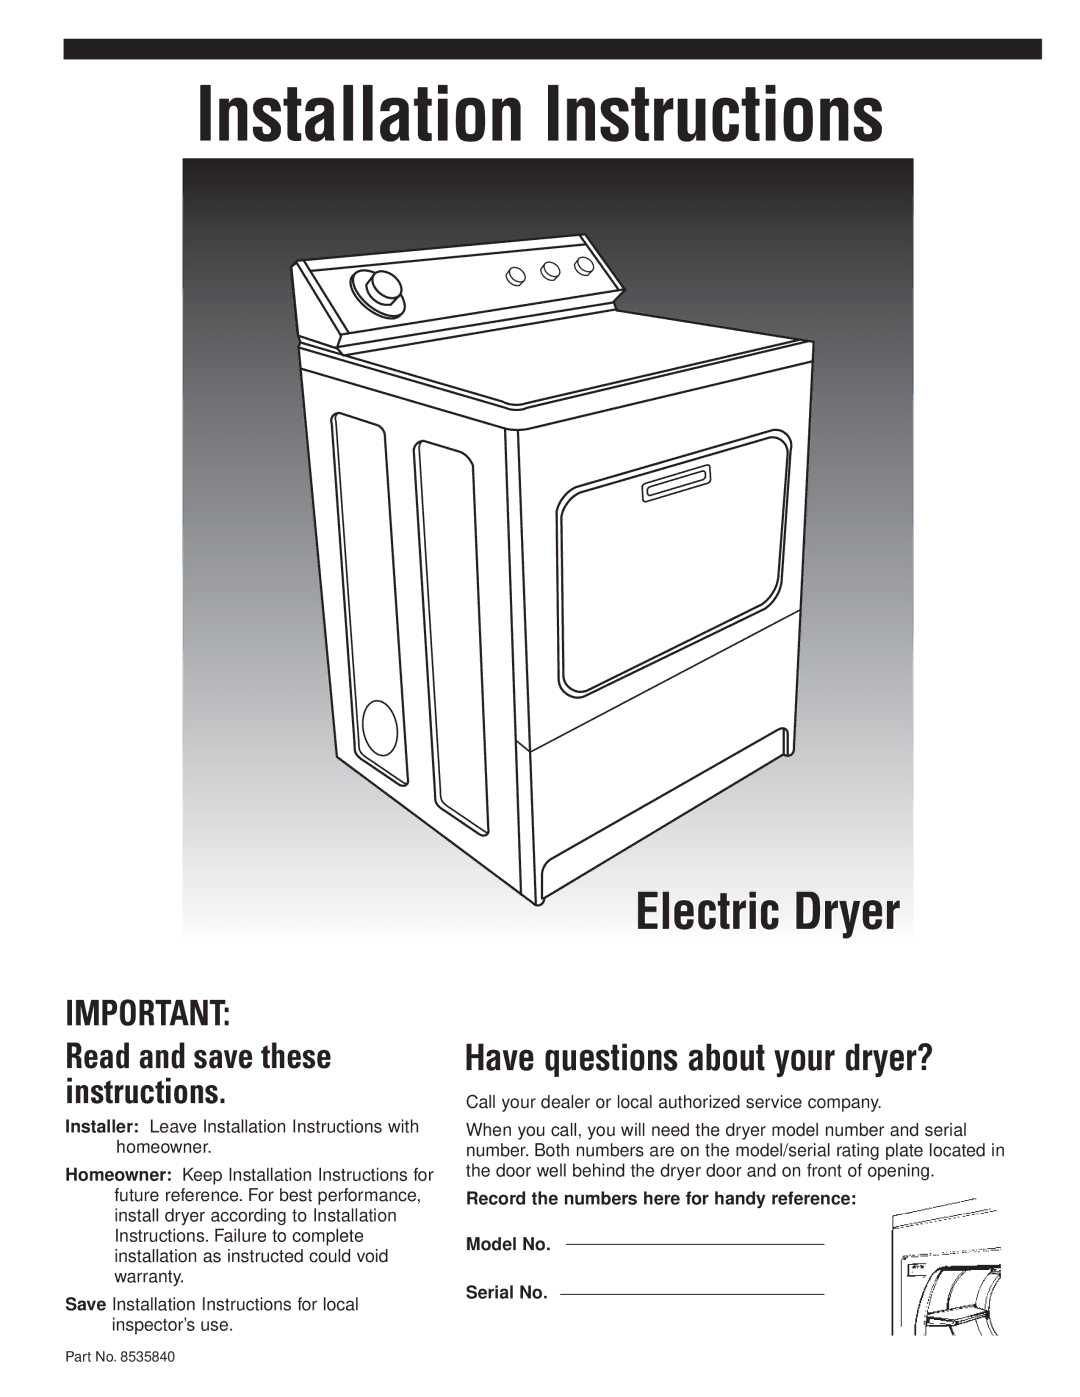 Whirlpool 8535840 installation instructions Installation Instructions, Have questions about your dryer? 